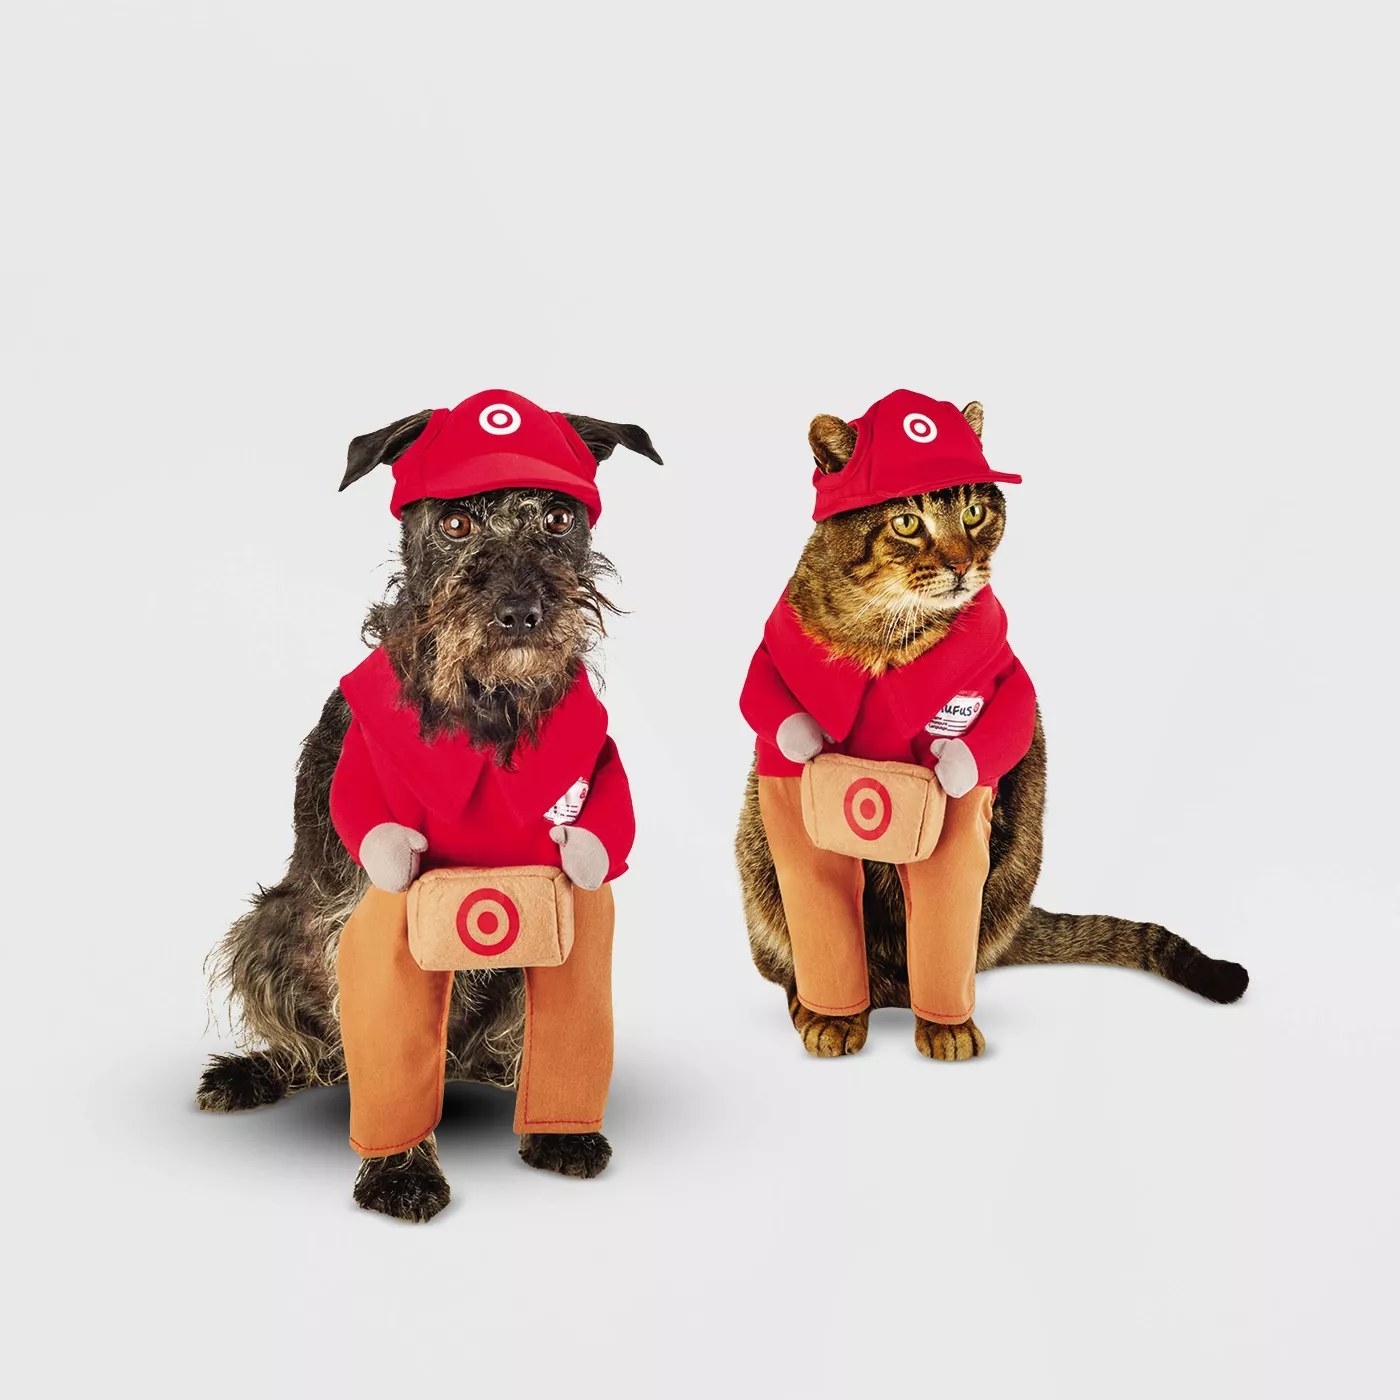 A cat and dog dressed as Target staff members